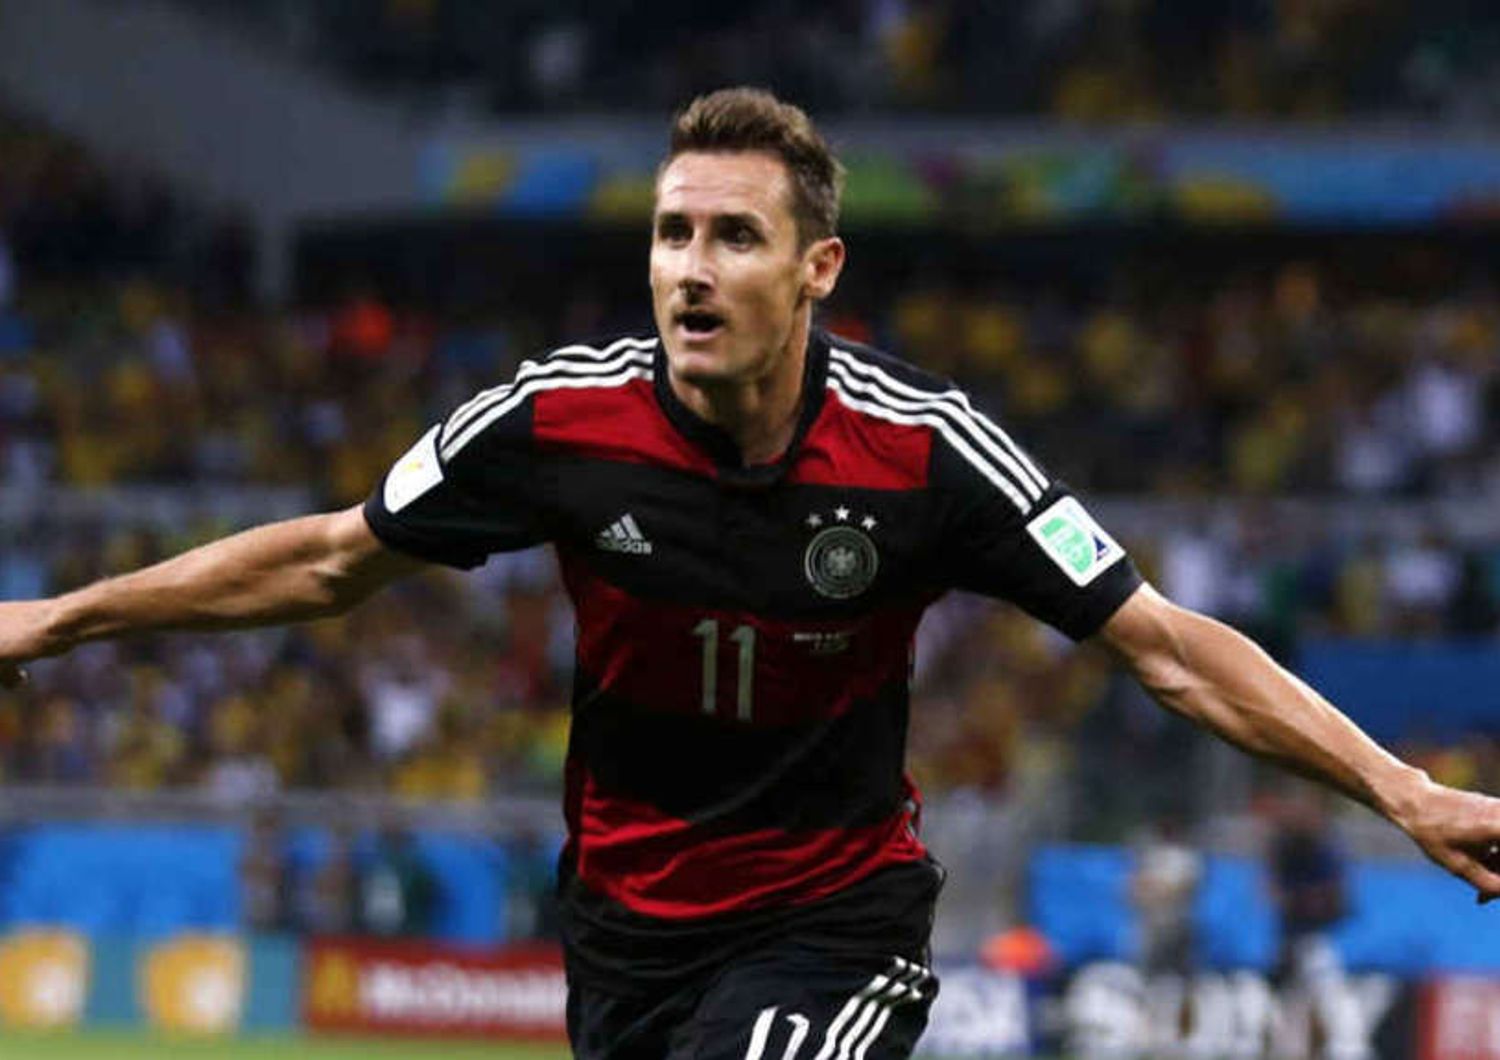 Football: Klose to reflect on his Germany future